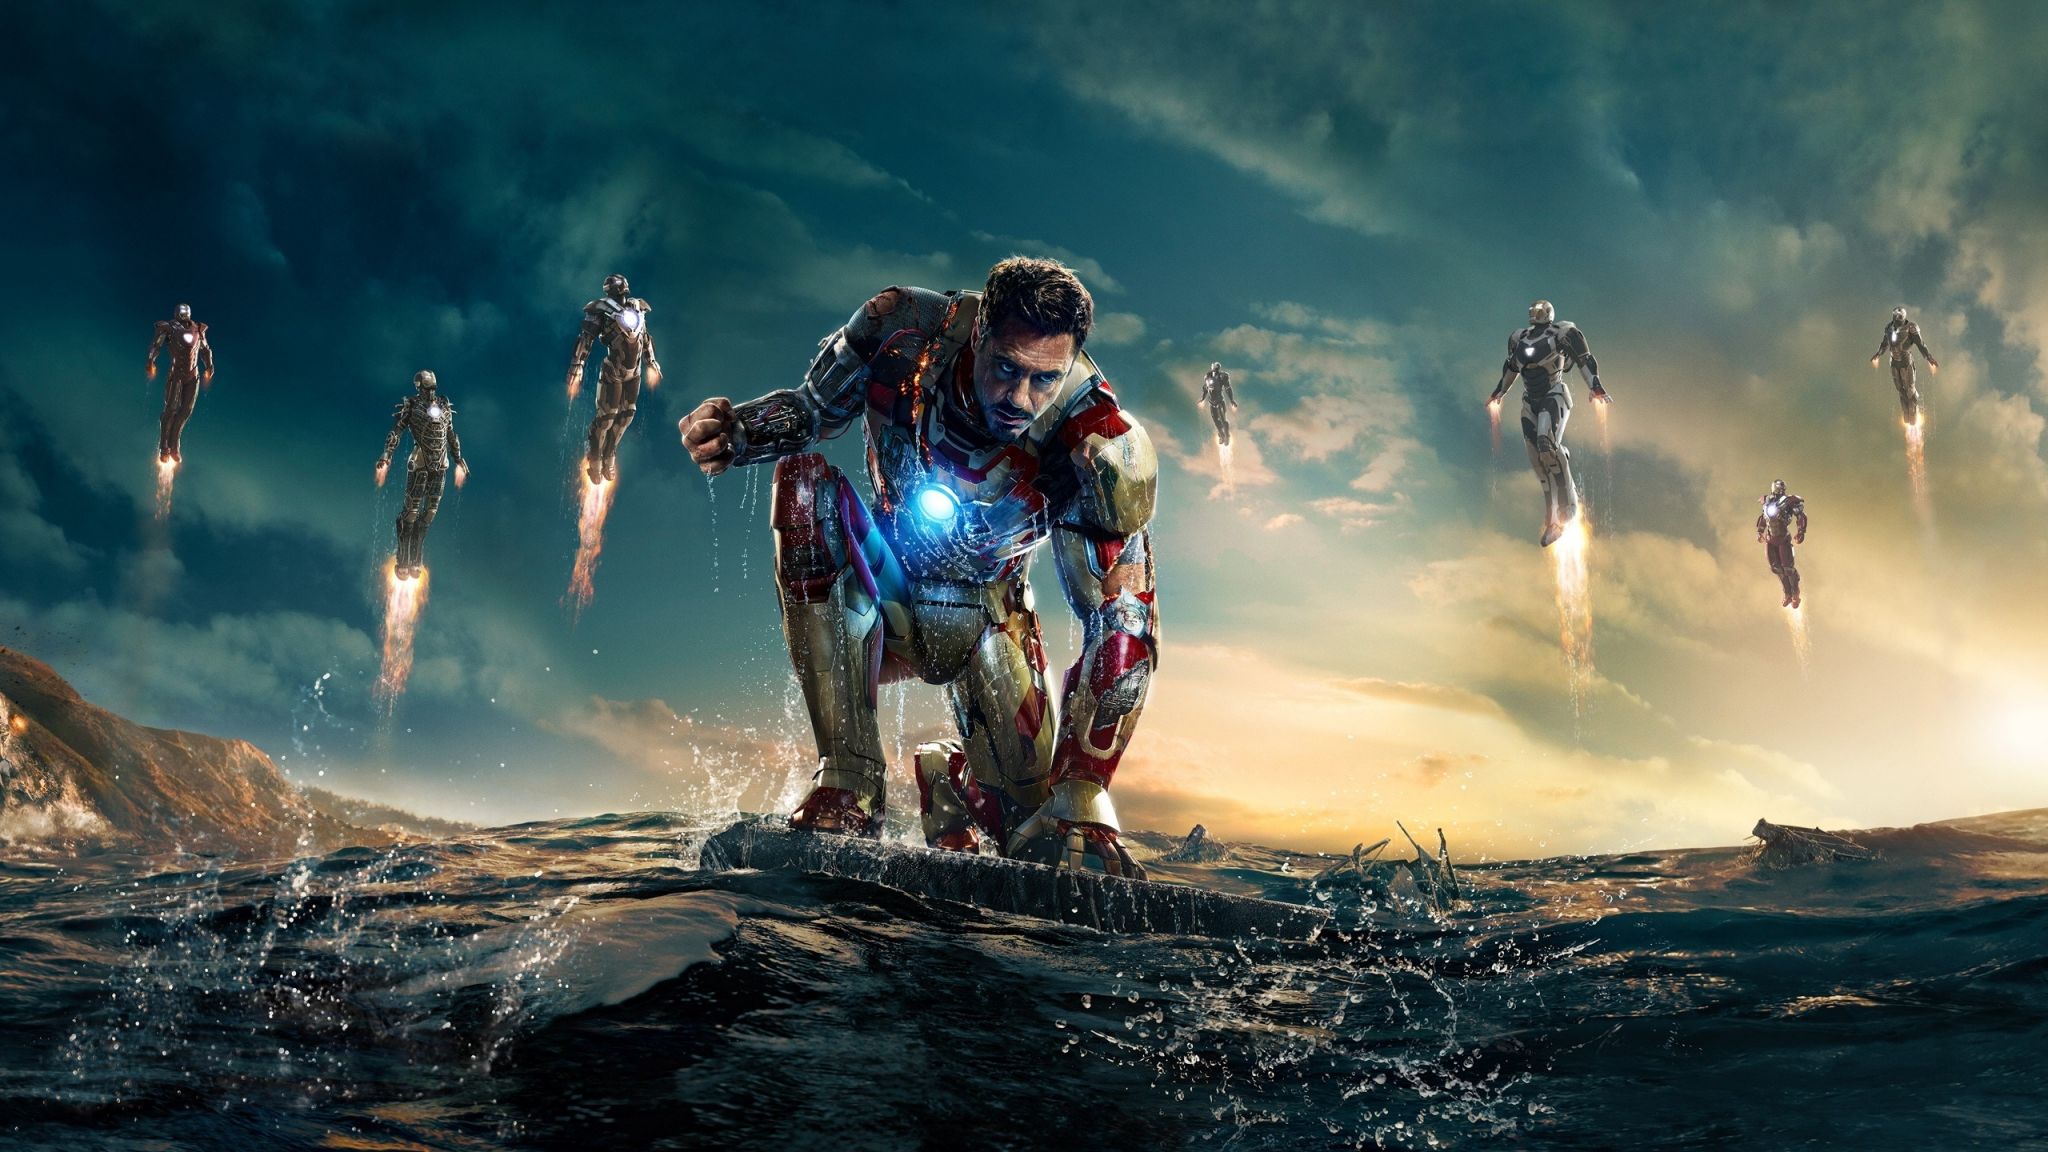 Iron Man Background Wallpaper For Puter And